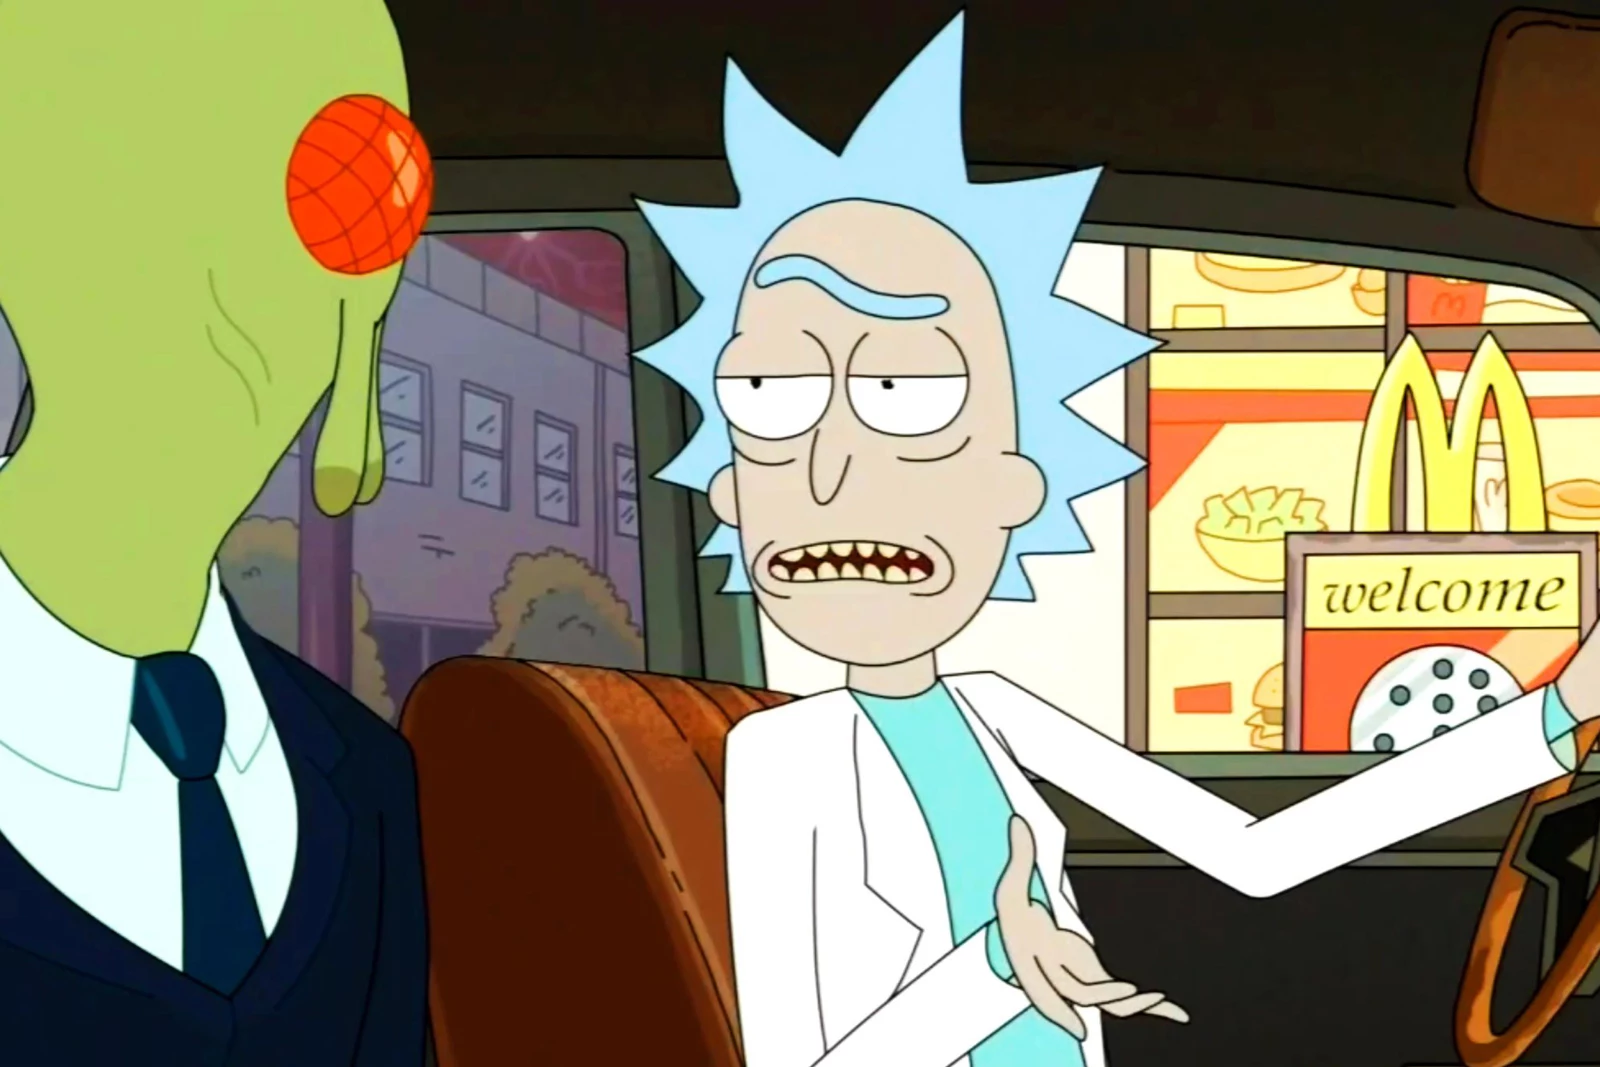 Rick and Morty s Pickle Rick Was Based on Breaking Bad